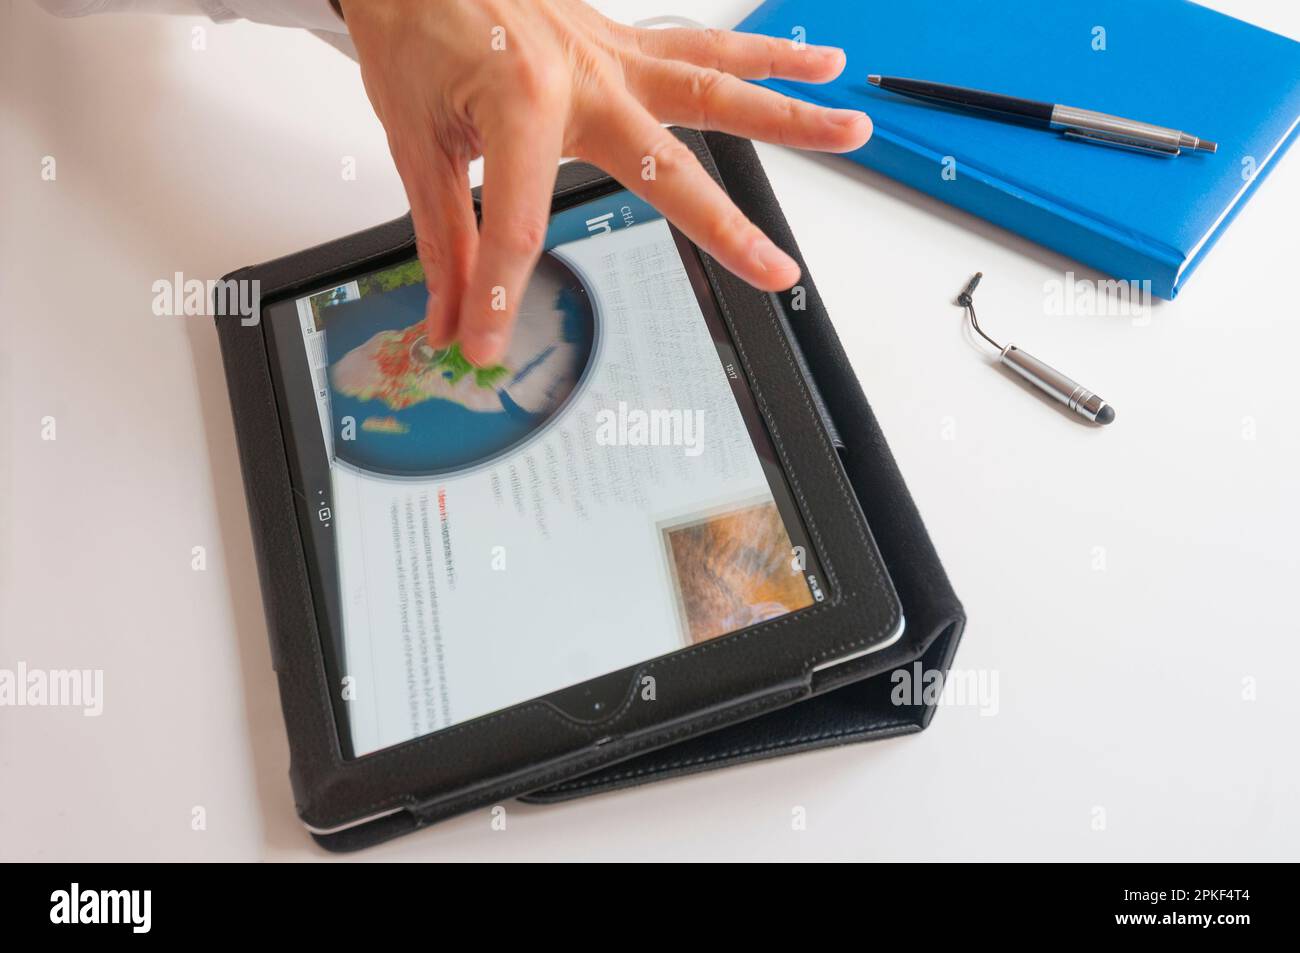 Man's hand using a tablet Stock Photo